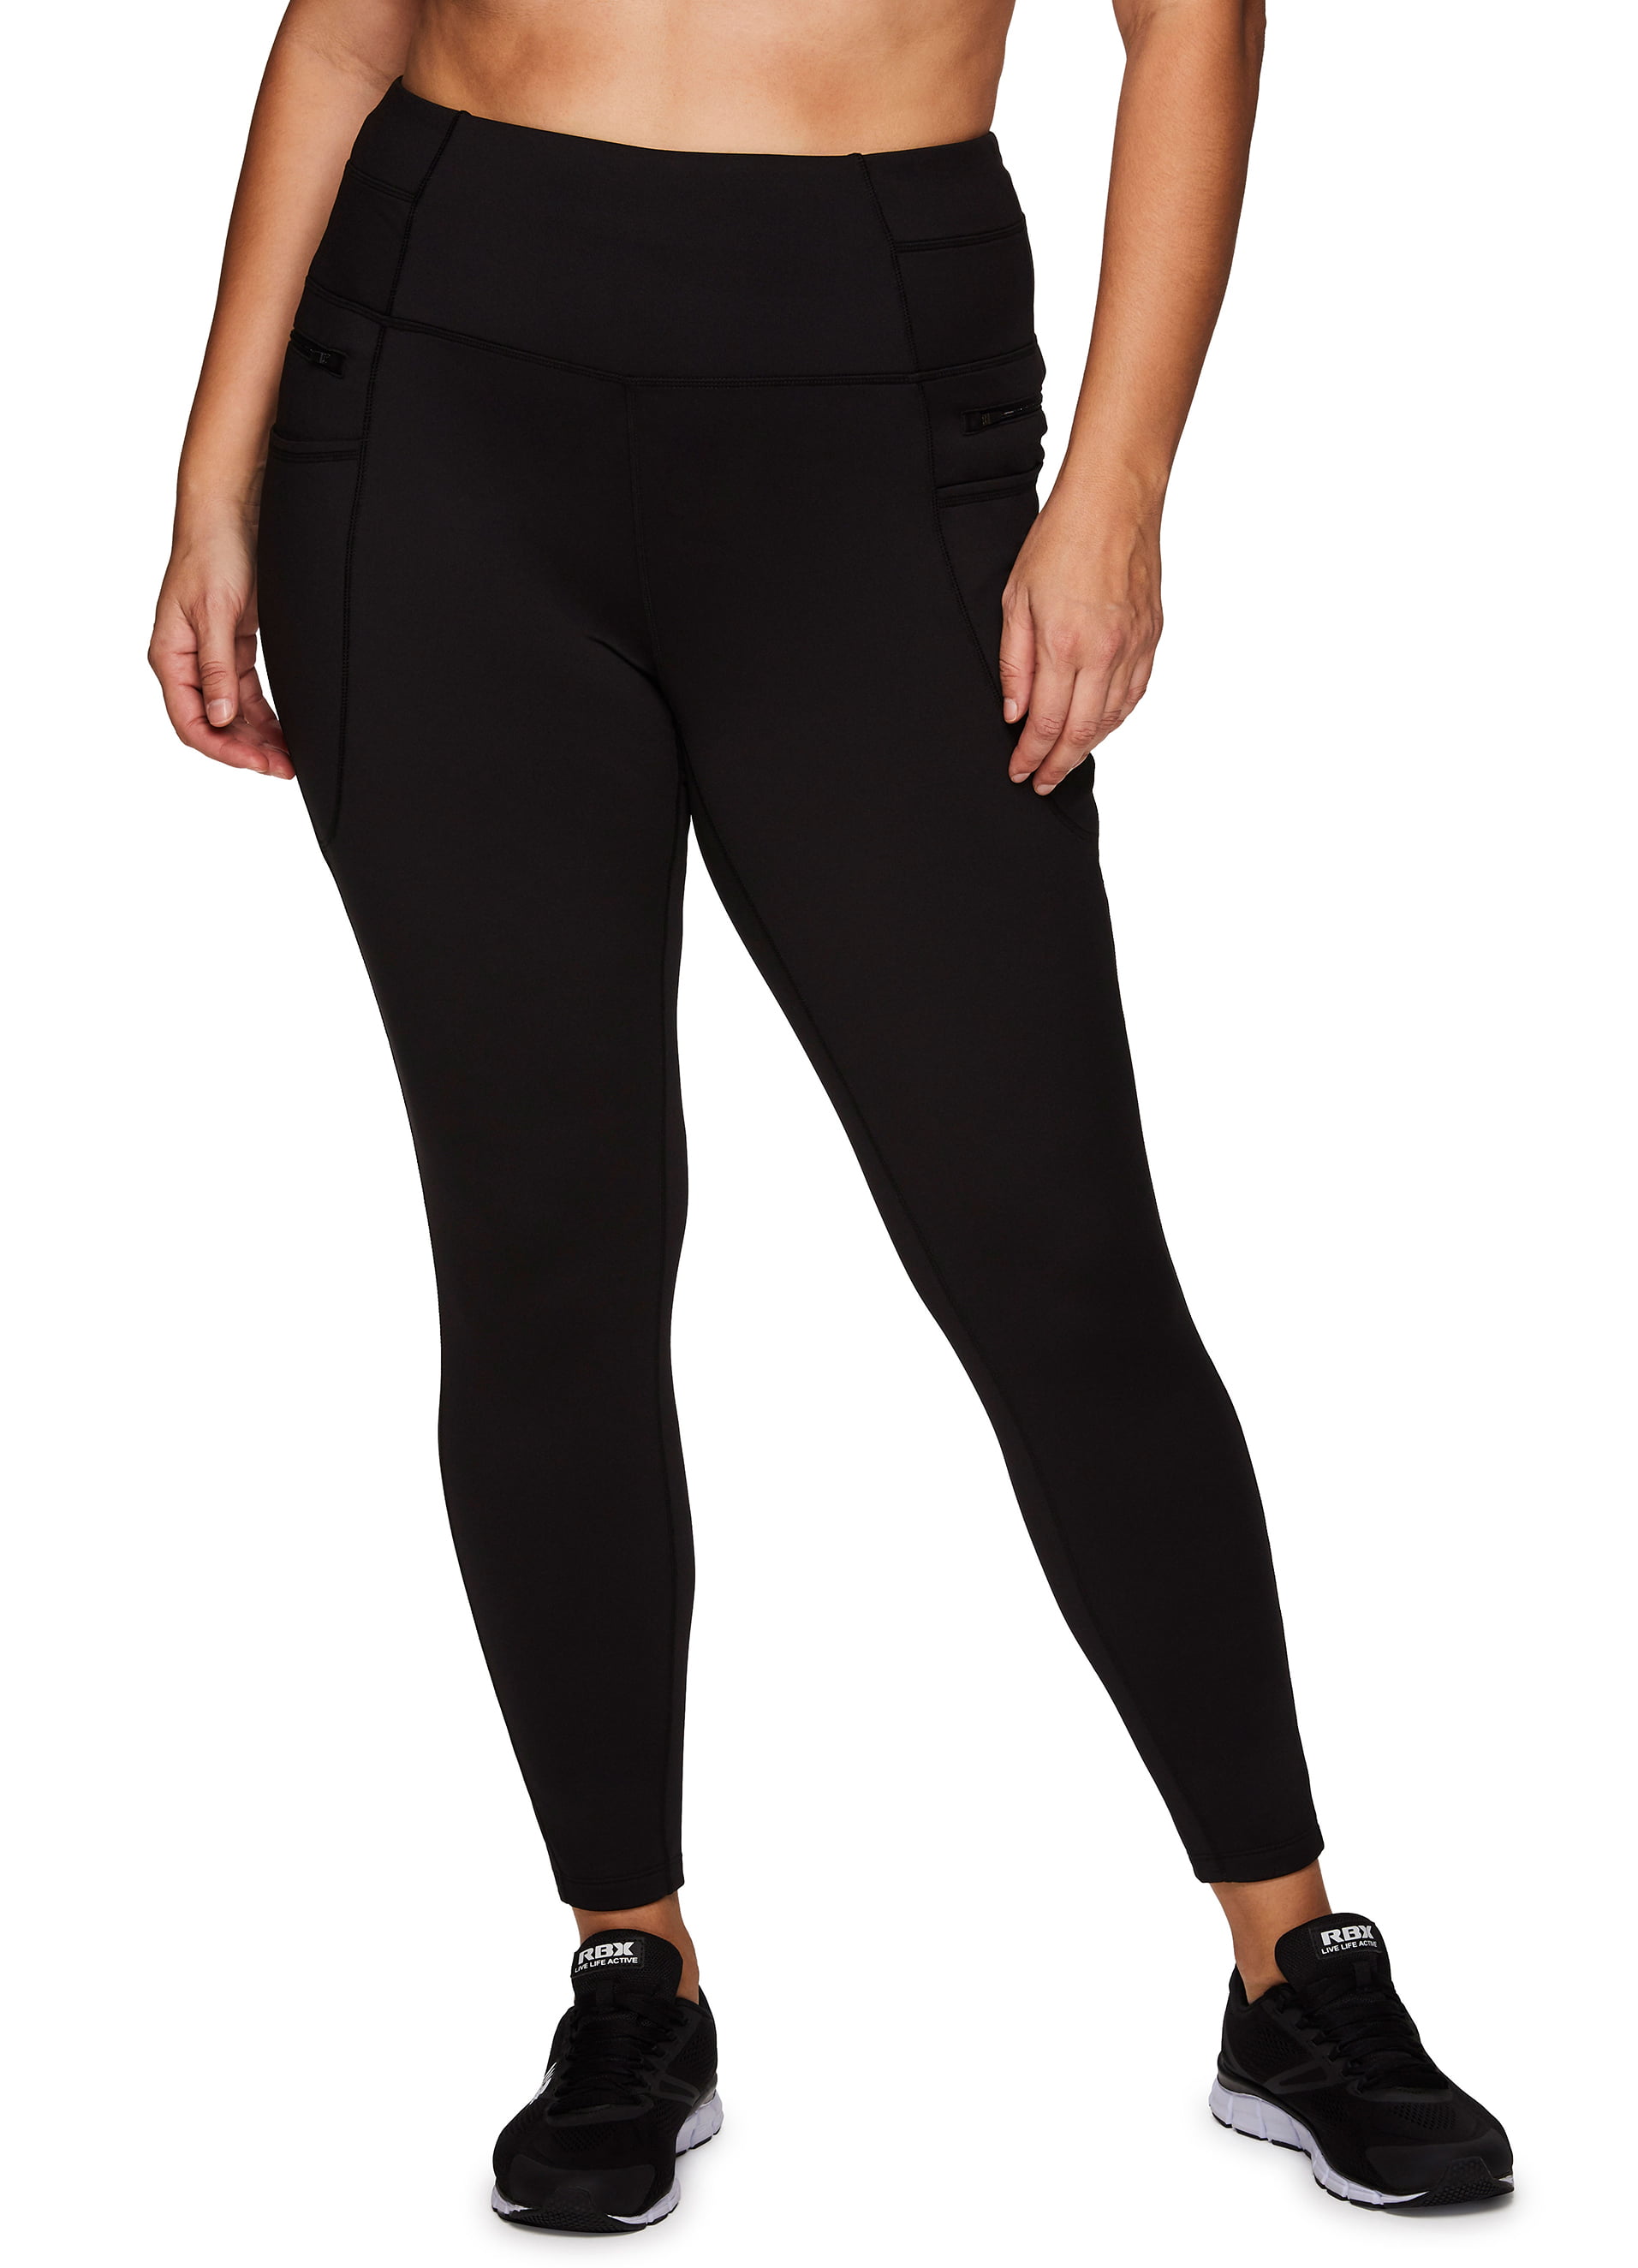 Rbx Active Black Leggings With Pockets Size L - $8 (60% Off Retail) - From  Katelyn